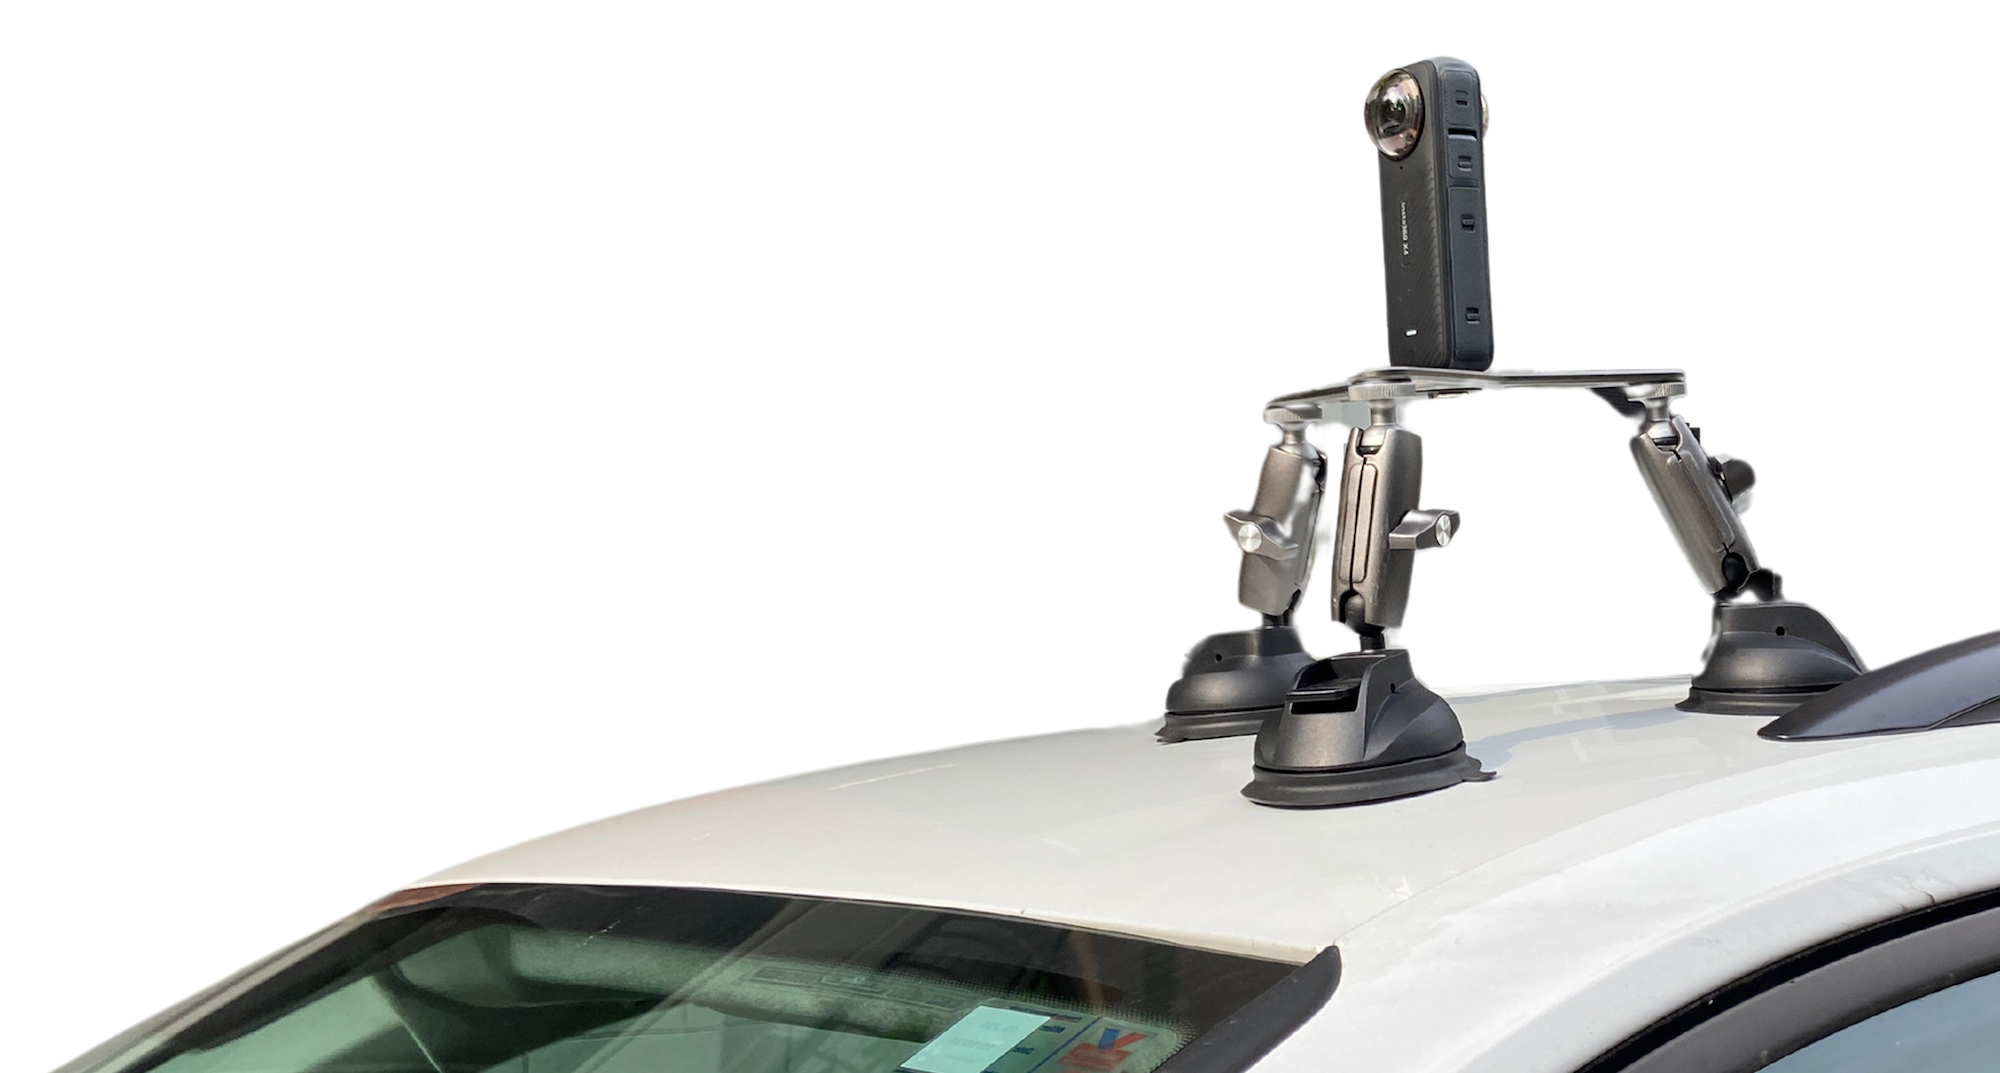 Camera mounted with tripod on top of vehicle